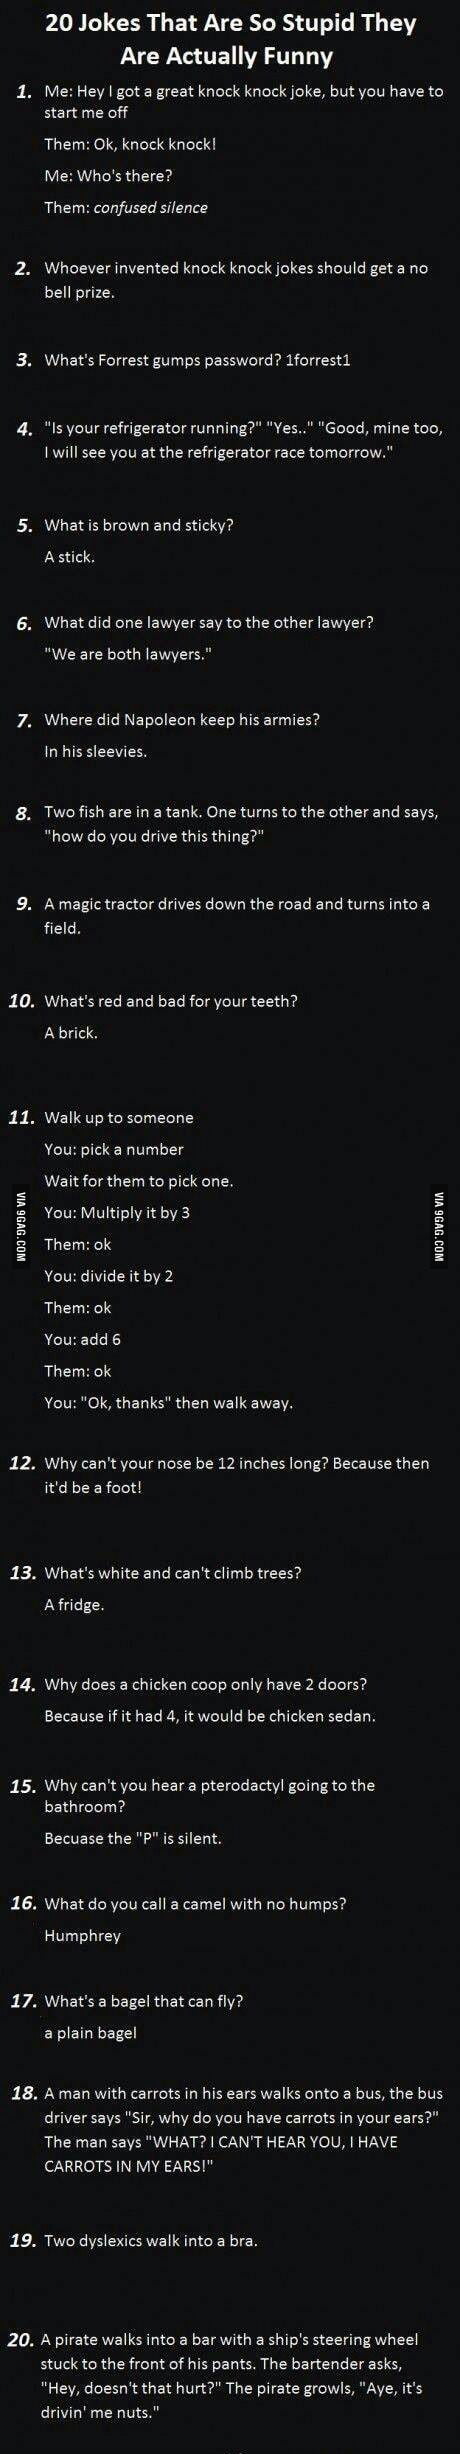 Jokes That Are So Stupid They Are Actually Funny 9gag